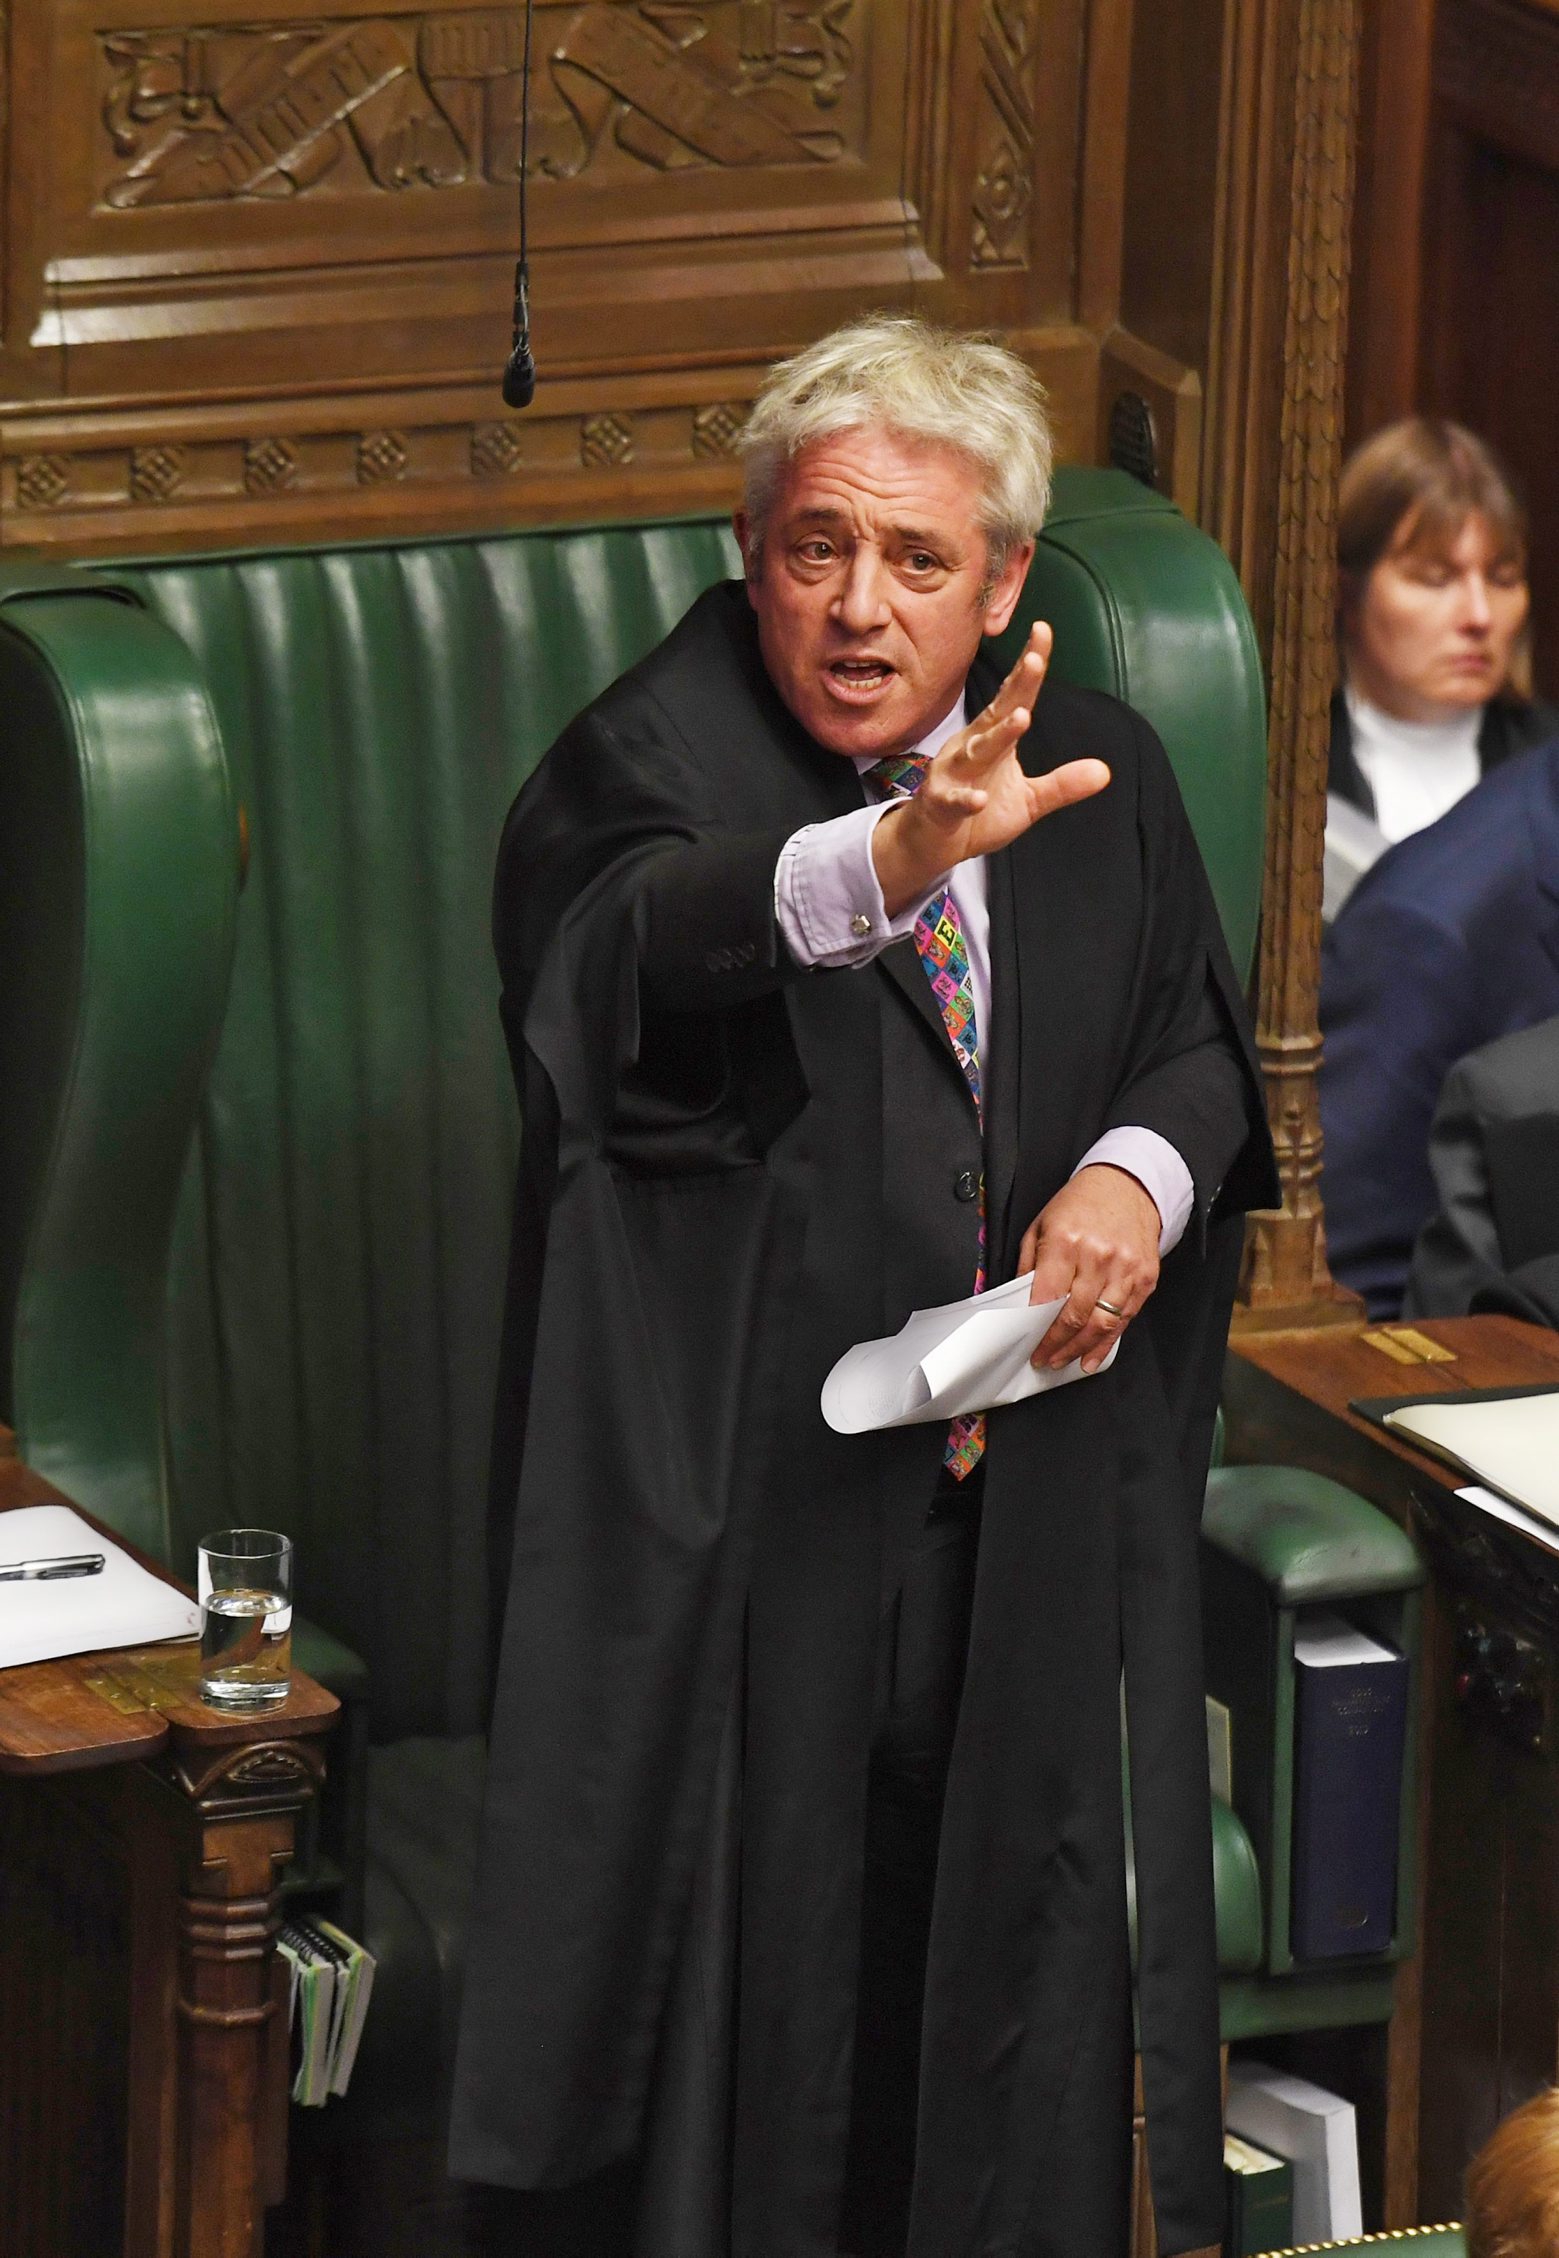 epa07961858 A handout picture made available by the UK Parliament shows the Speaker of the Parliament John Bercow (C) during a debate in the House of Commons in London, Britain, 21 October 2019 (reissued 31 October 2019). John Bercow announced 09 September 2019 he would step down as speaker of the House of Commons on 31 October 2019.  EPA/JESSICA TAYLOR / UK PARLIAMENT / MANDATORY CREDIT: UK PARLIAMENT / JESSICA TAYLOR - Images must not be altered in any way. HANDOUT EDITORIAL USE ONLY/NO SALES BRITAIN PARLIAMENT SPEAKER